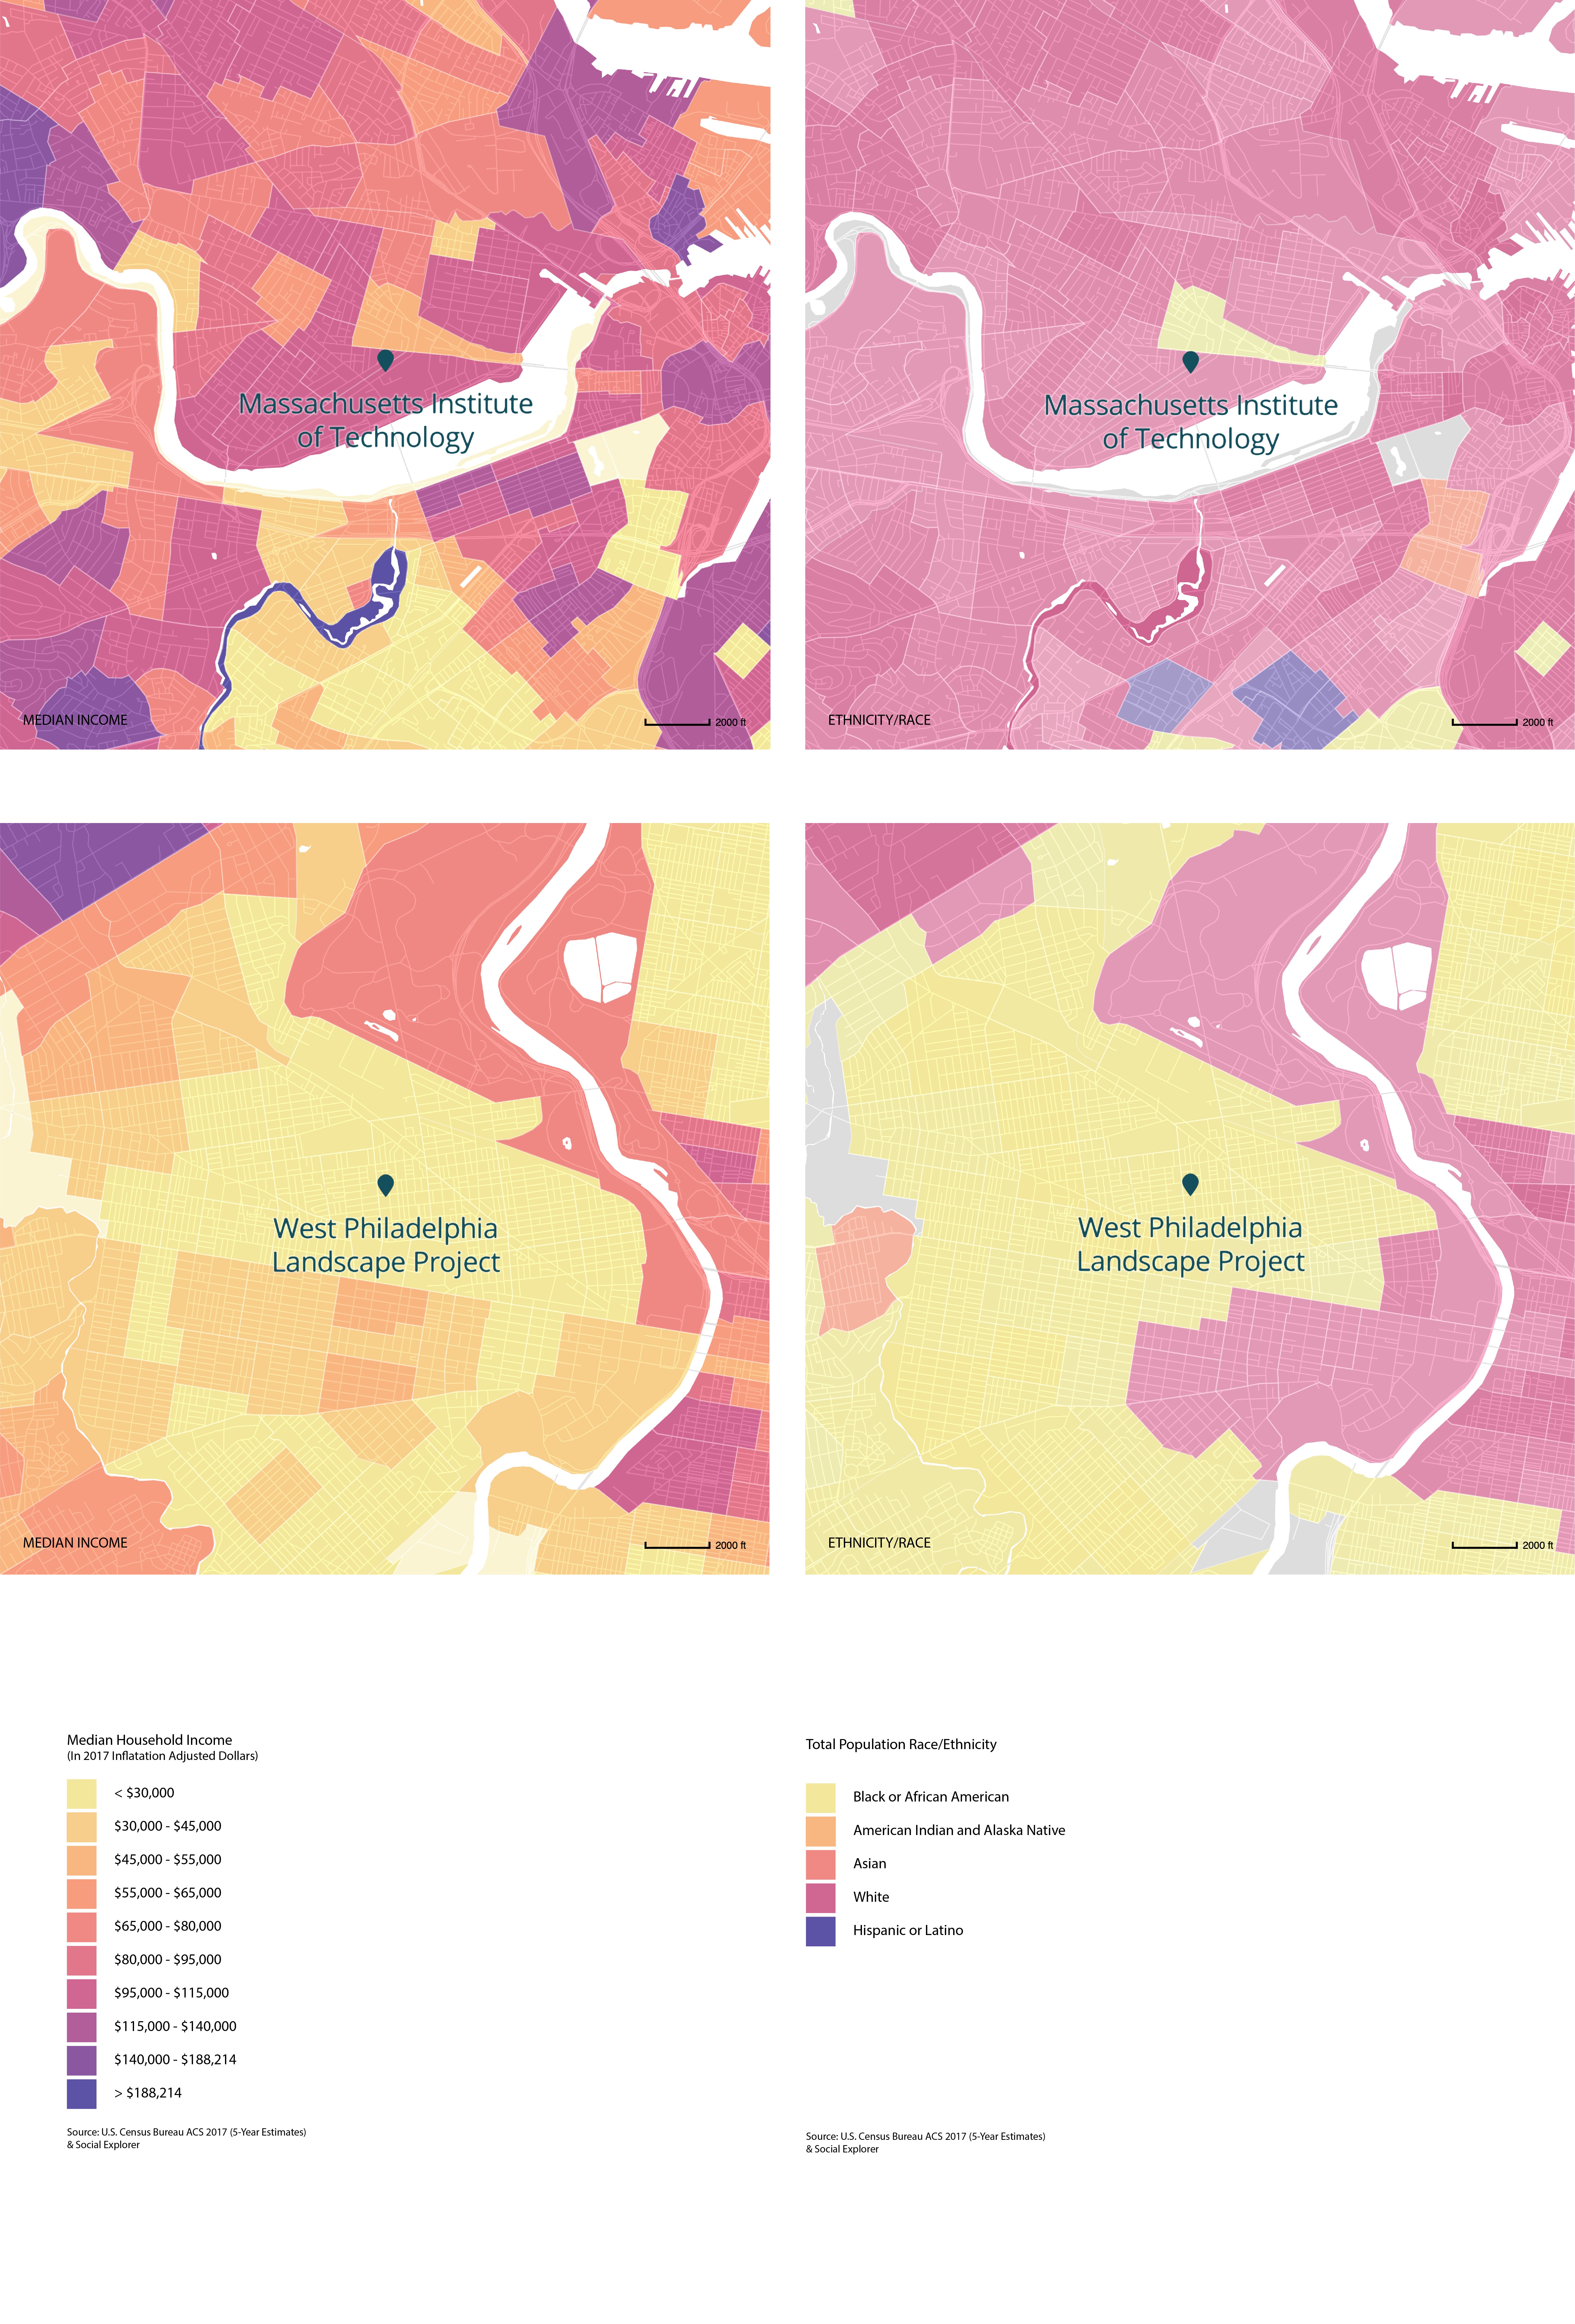 Income and Racial Demographics of Areas Surrounding MIT and the West Philadelphia Landscape Project